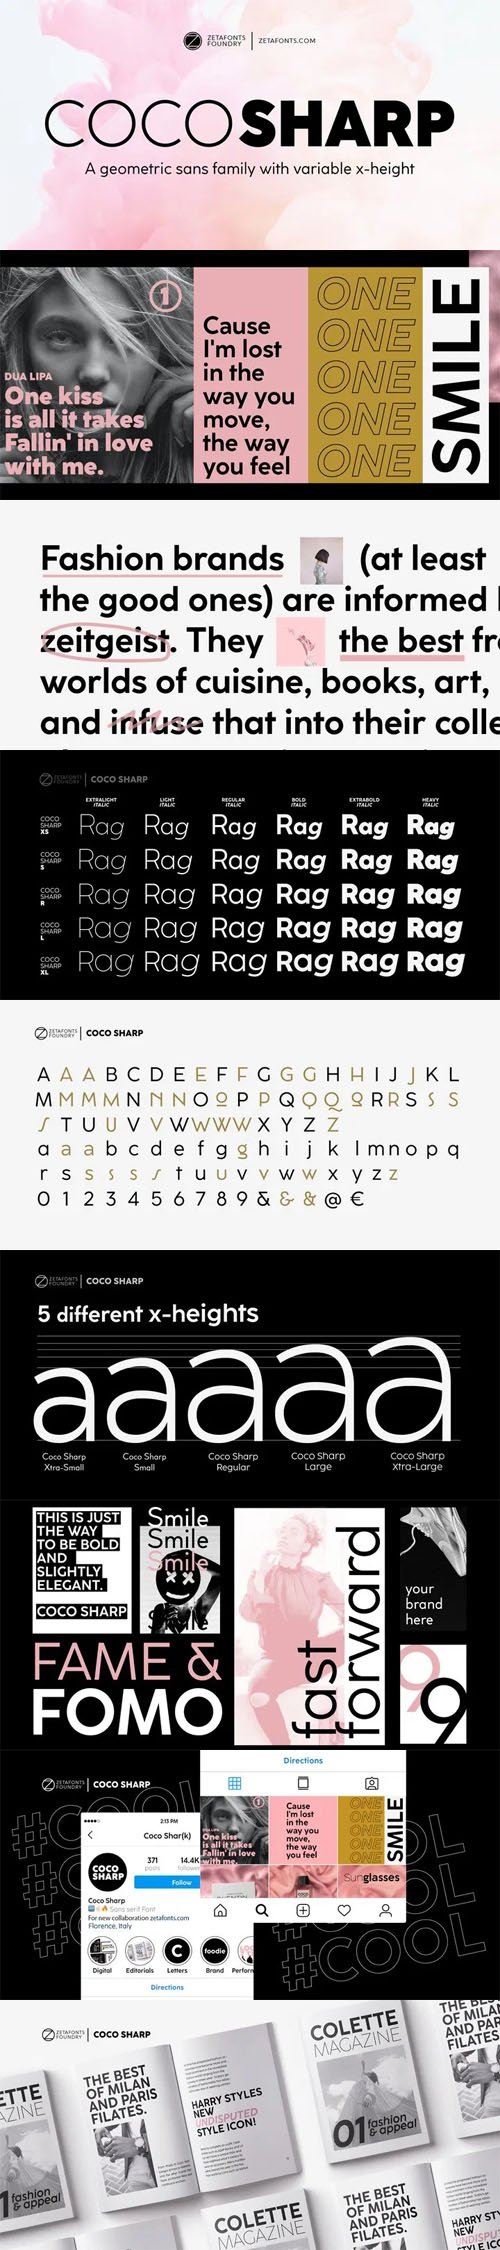 Coco Sharp - A Geometric Sans Family With Variable X-Heights [60-Weights]